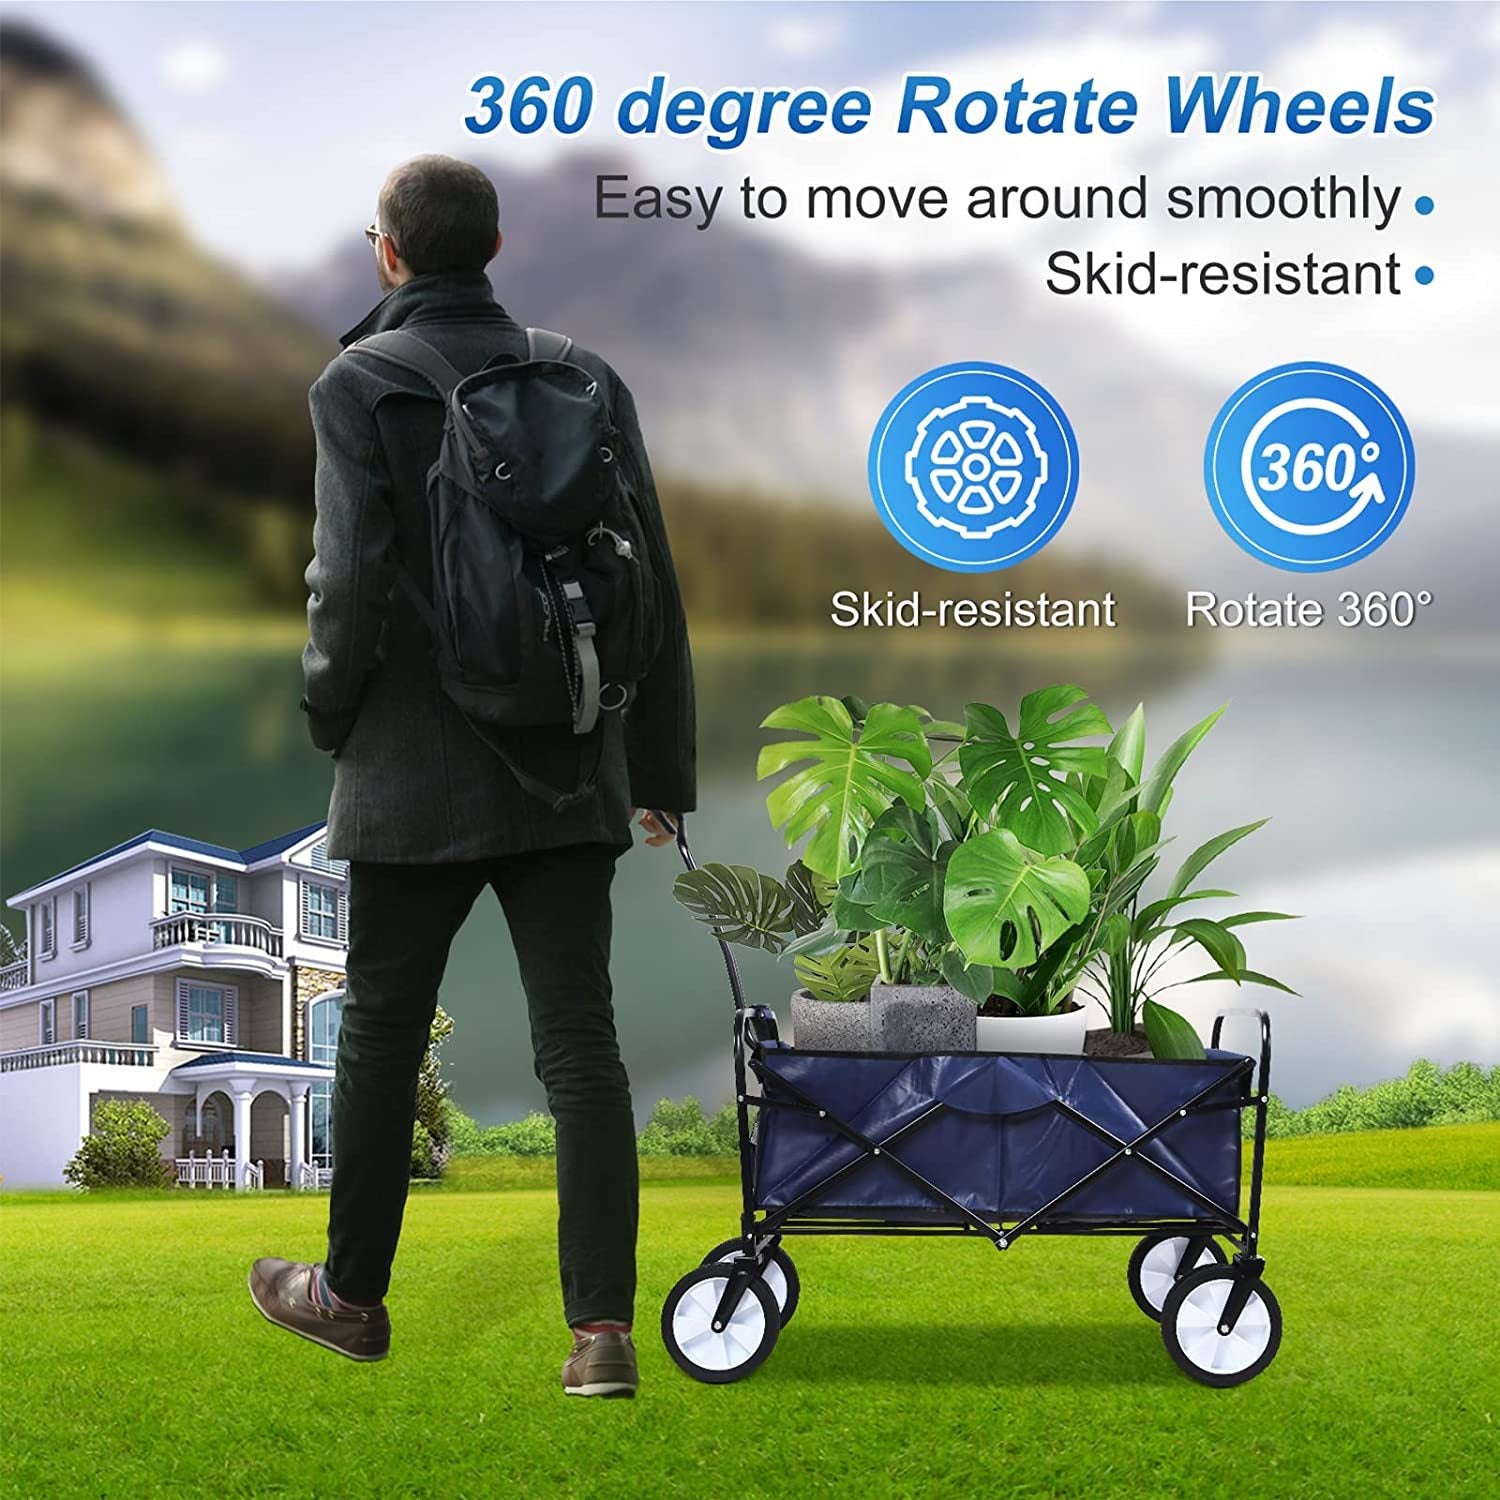 YSSOA Rolling Collapsible Garden Cart Camping Wagon blue-steel